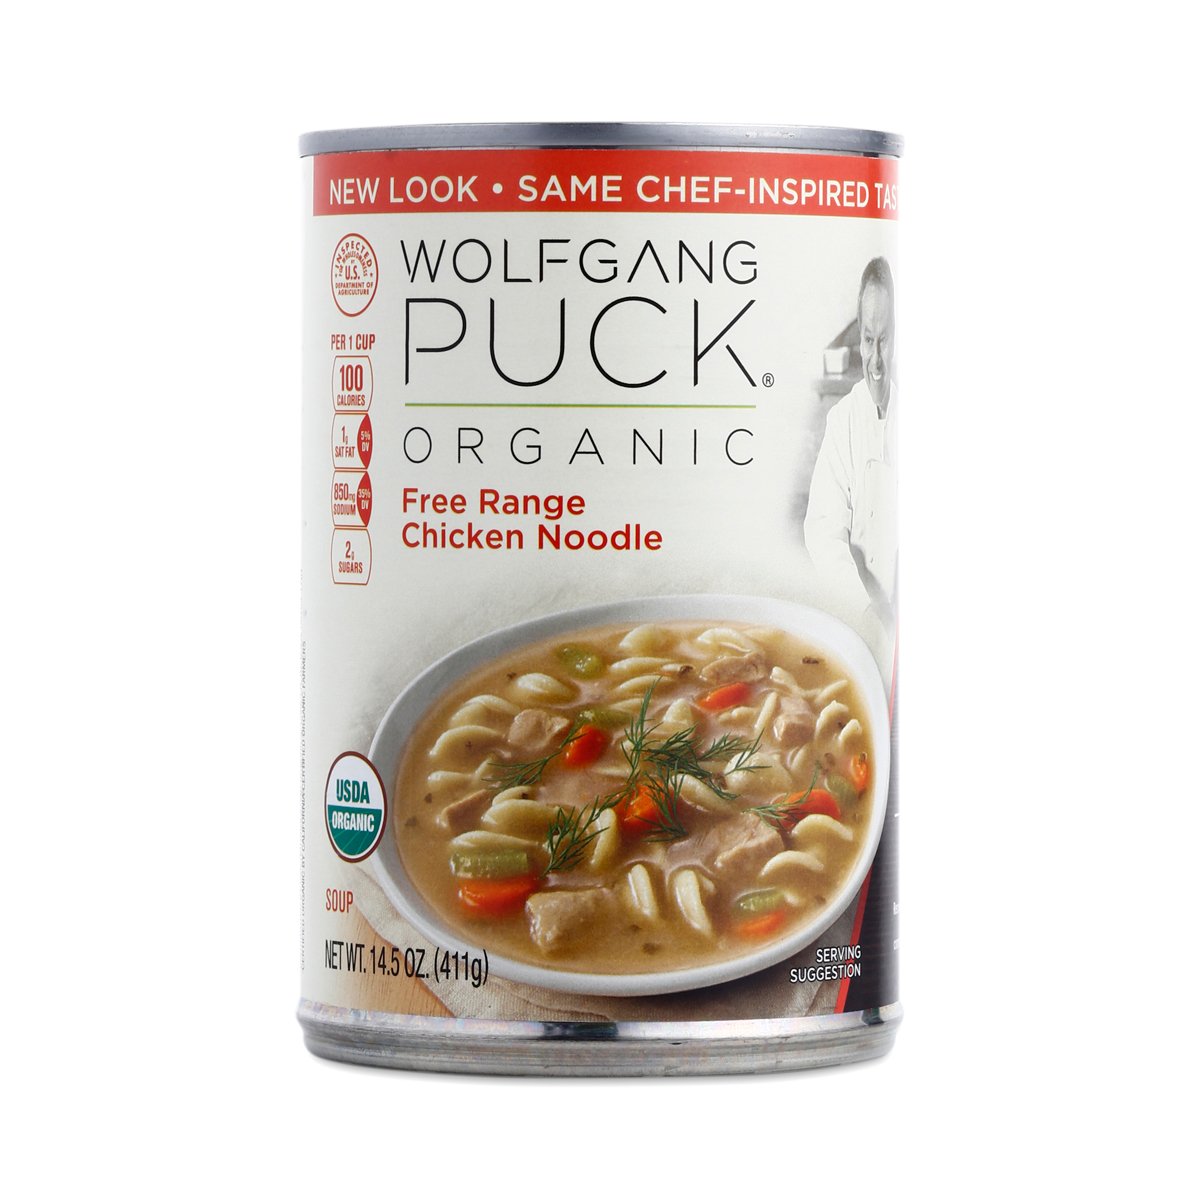 Organic Chicken Noodle Soup by Wolfgang Puck